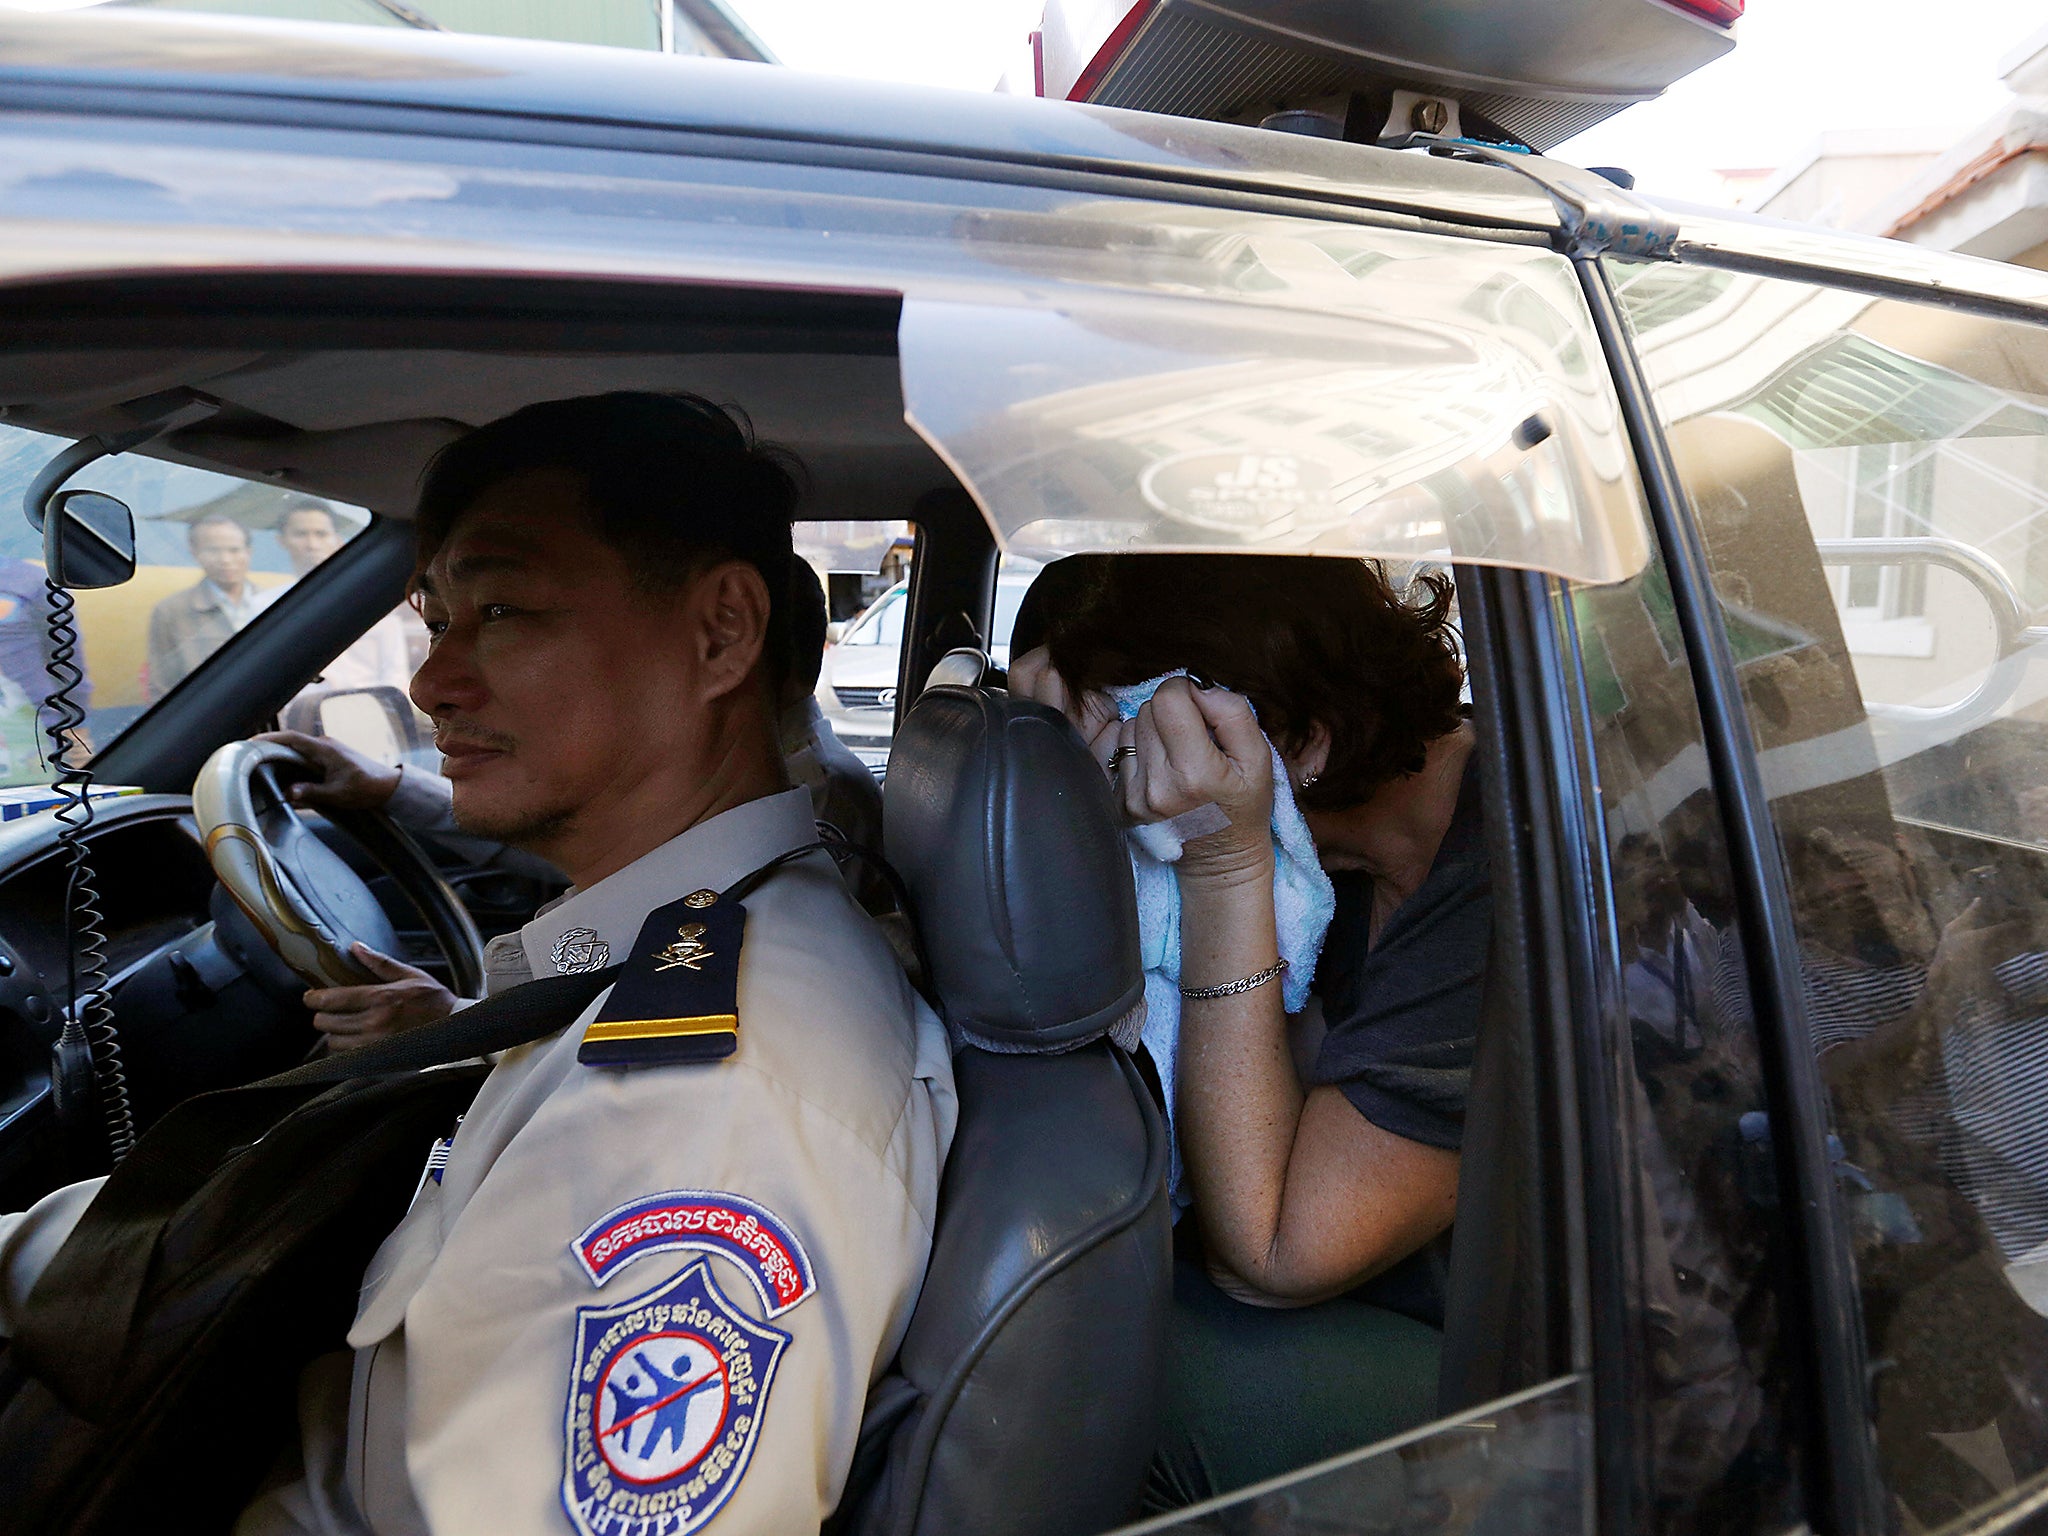 Australia's Tammy Davis-Charles, sits in a police vehicle after appearing for a questioning at the Municipal Court of Phnom Penh, Cambodia